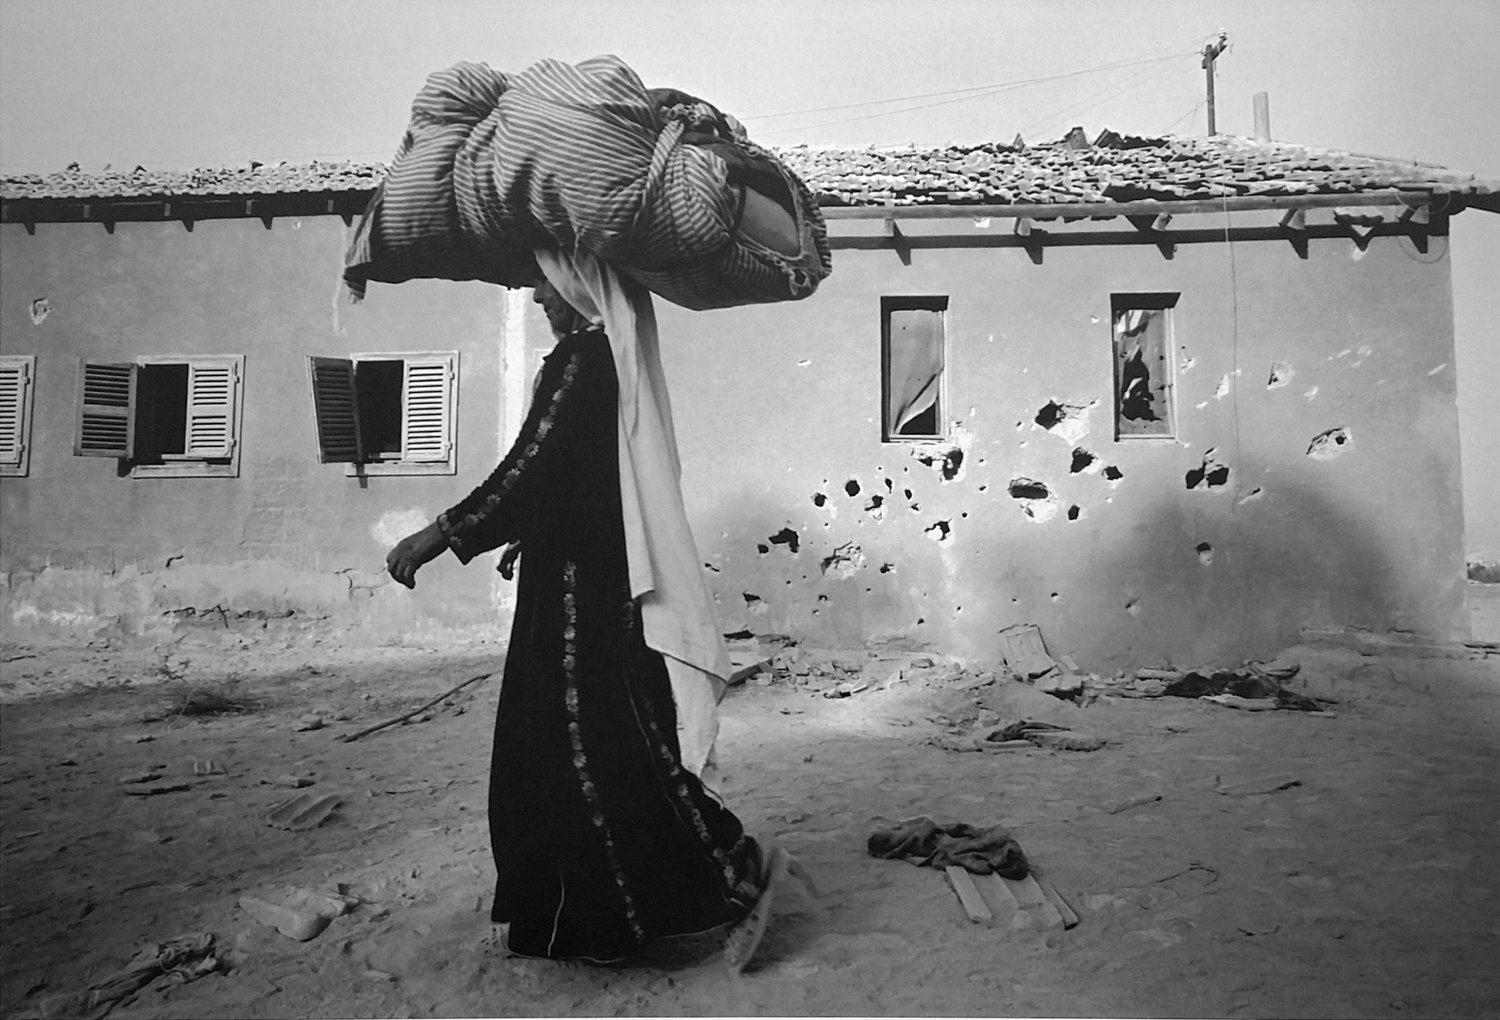 Leonard Freed photographed a refugee woman walking toward the Allenby Bridge that crosses the Jordan River near Jericho in 1967. This image is included in the exhibition ‘Leonard Freed: Israel Magazine 1967-1968,’ on display at the Hebrew Home at Riverdale’s Derfner Judaica Museum through Jan. 5.